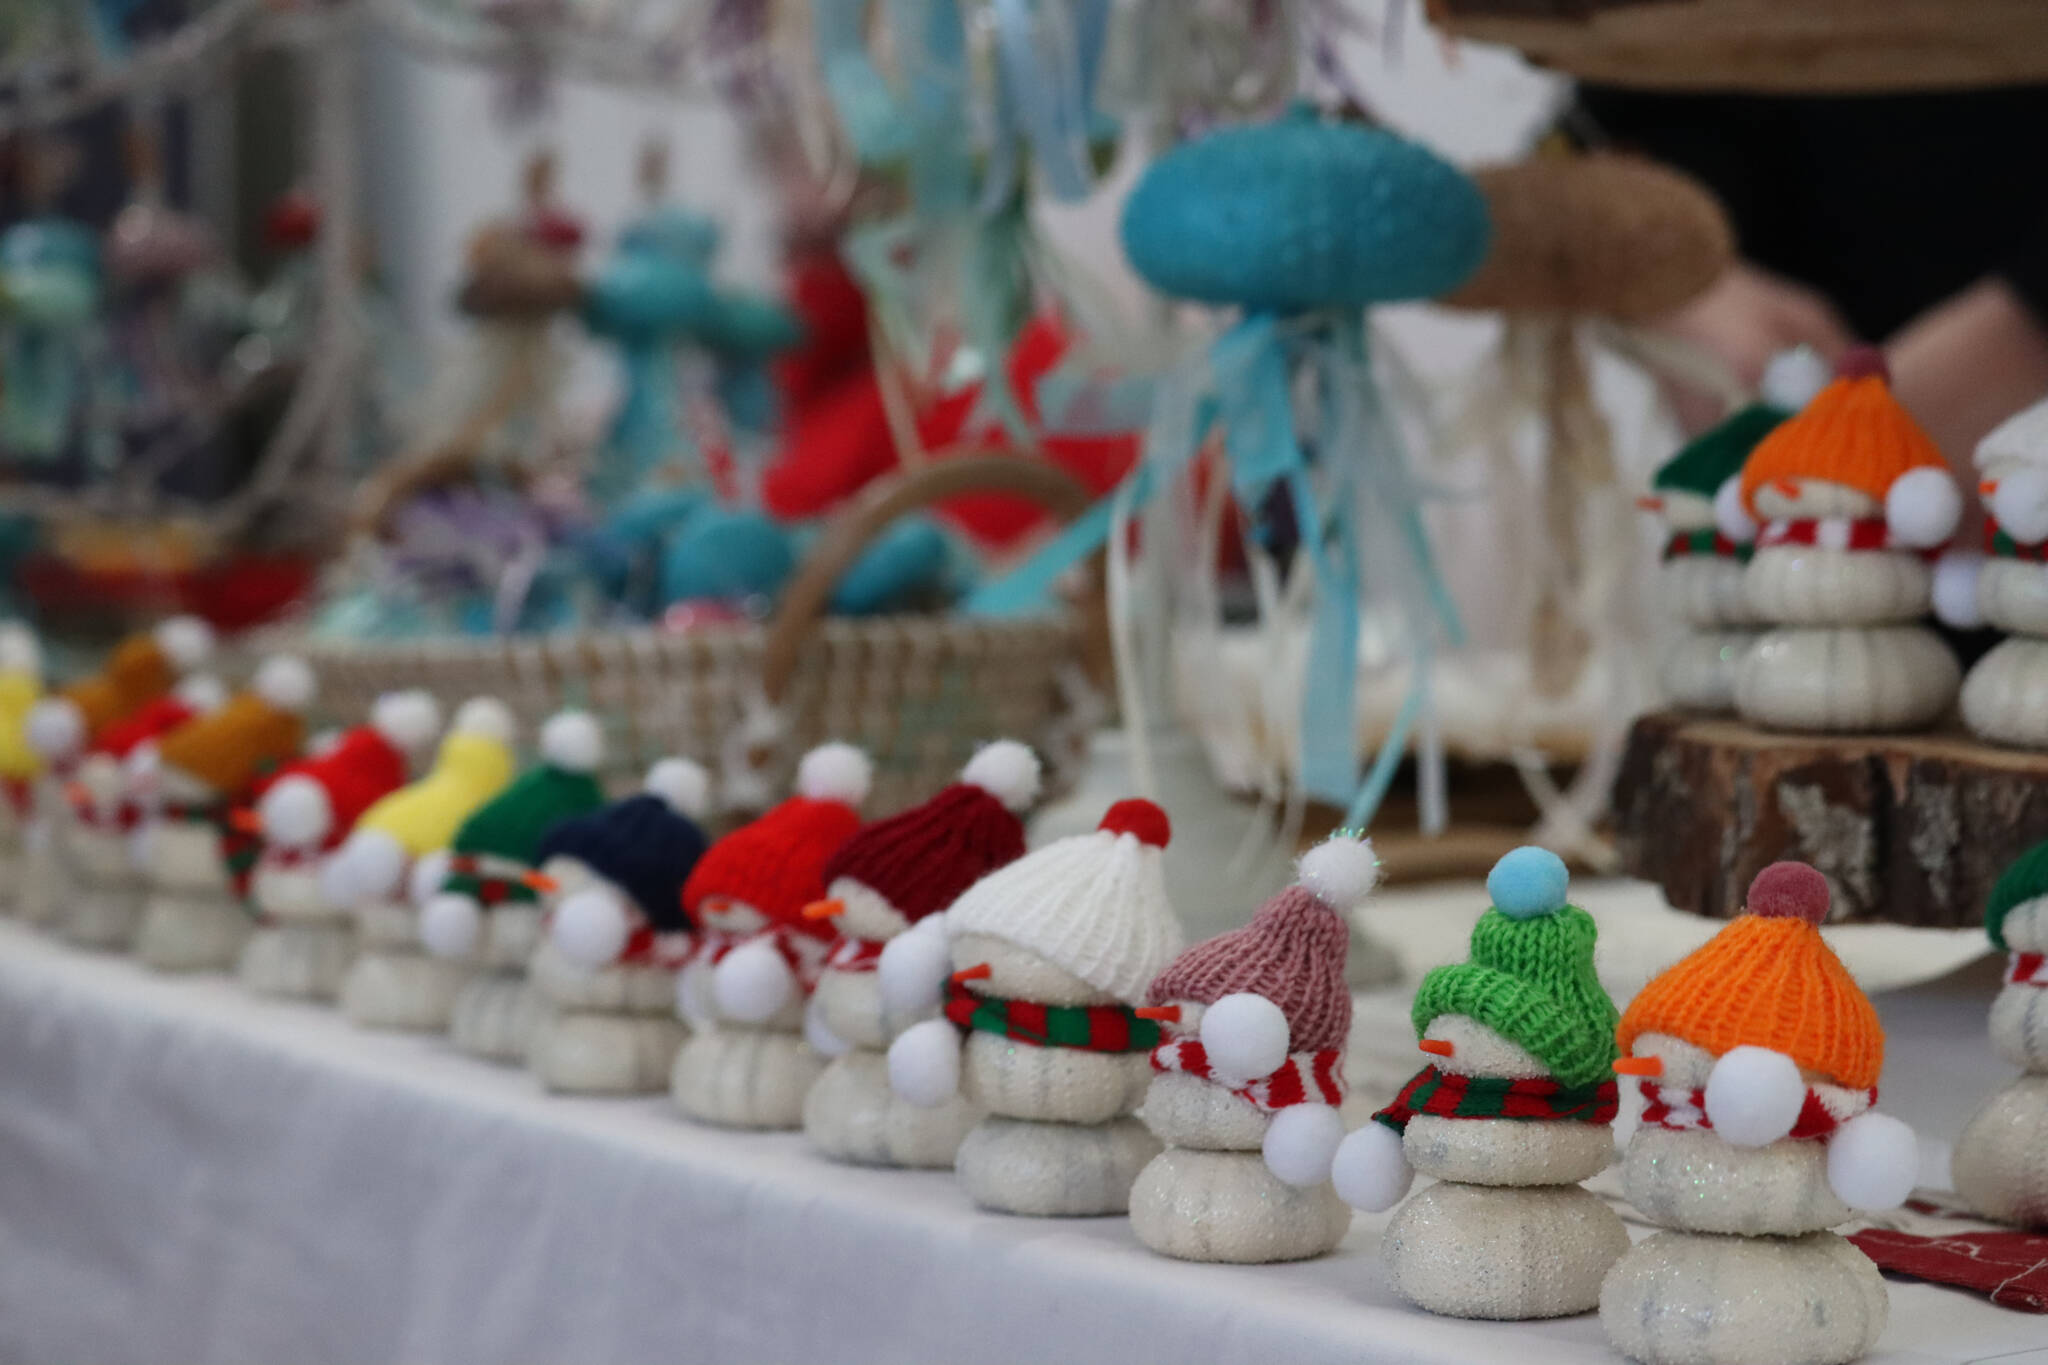 Margaret Mimnaugh with Tidal Creations from Ketchikan sets up her seasonal creations made with found hand painted sea urchin shells, along with snowmen and jelly fish at this year’s Stocking Stuffer Showcase on Saturday the Juneau Arts and Culture Center. (Jonson Kuhn / Juneau Empire)